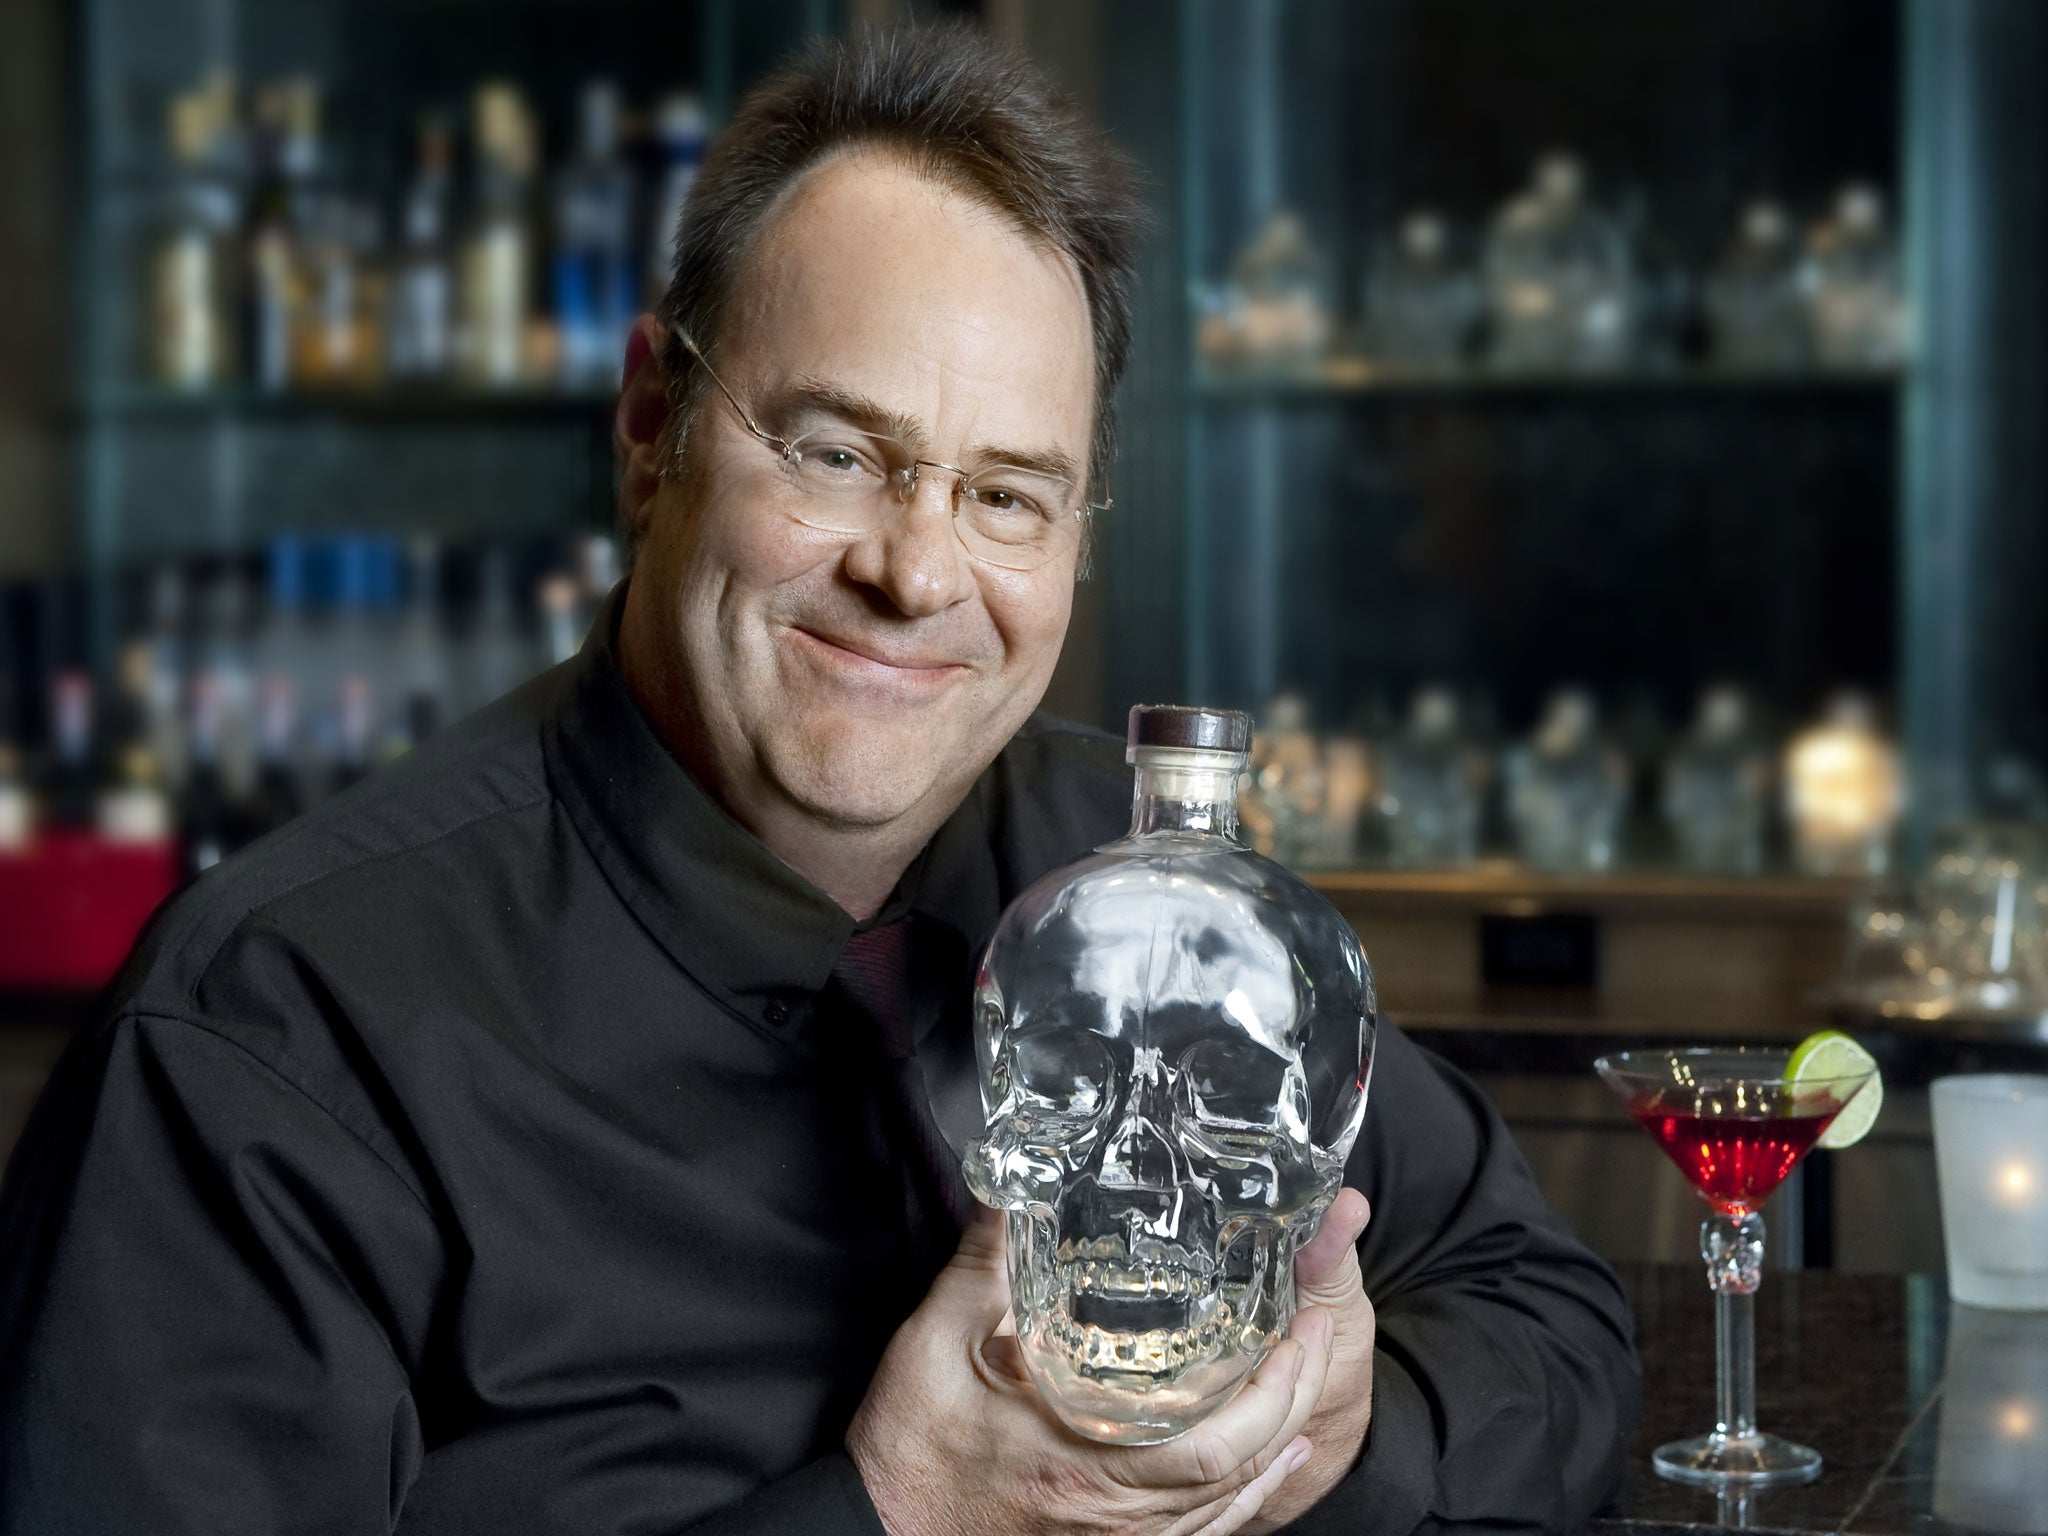 Dan Aykroyd: 'I've eaten mac and cheese my whole life. Now I like it with spice and truffle oil'